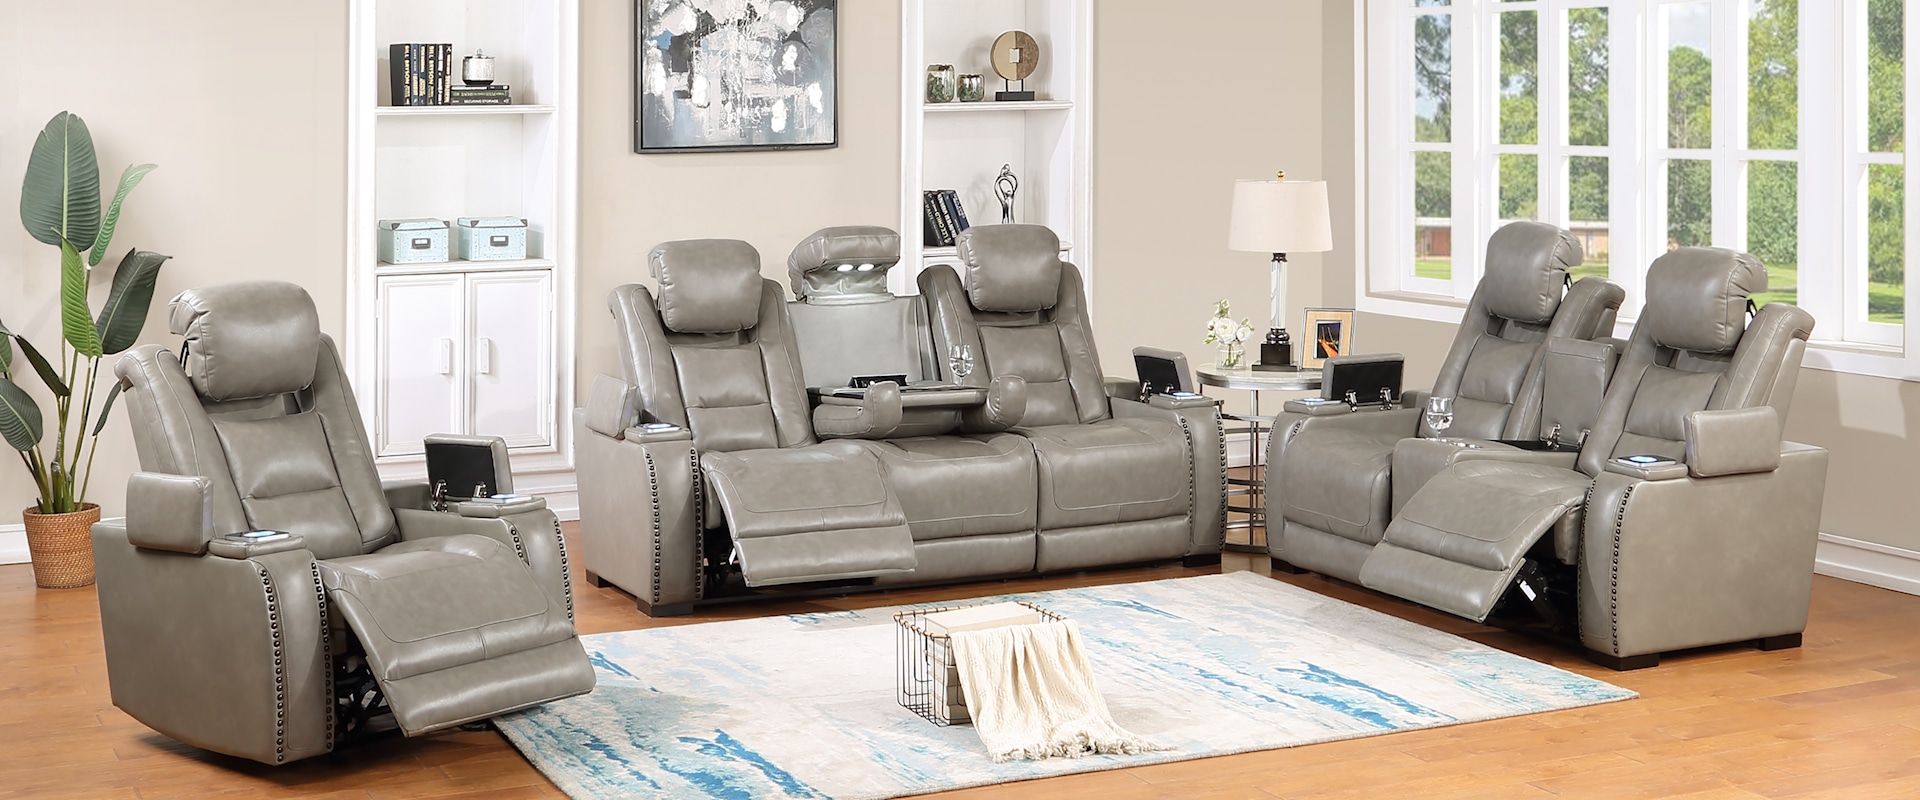 Power Living Room Group with Power Headrest